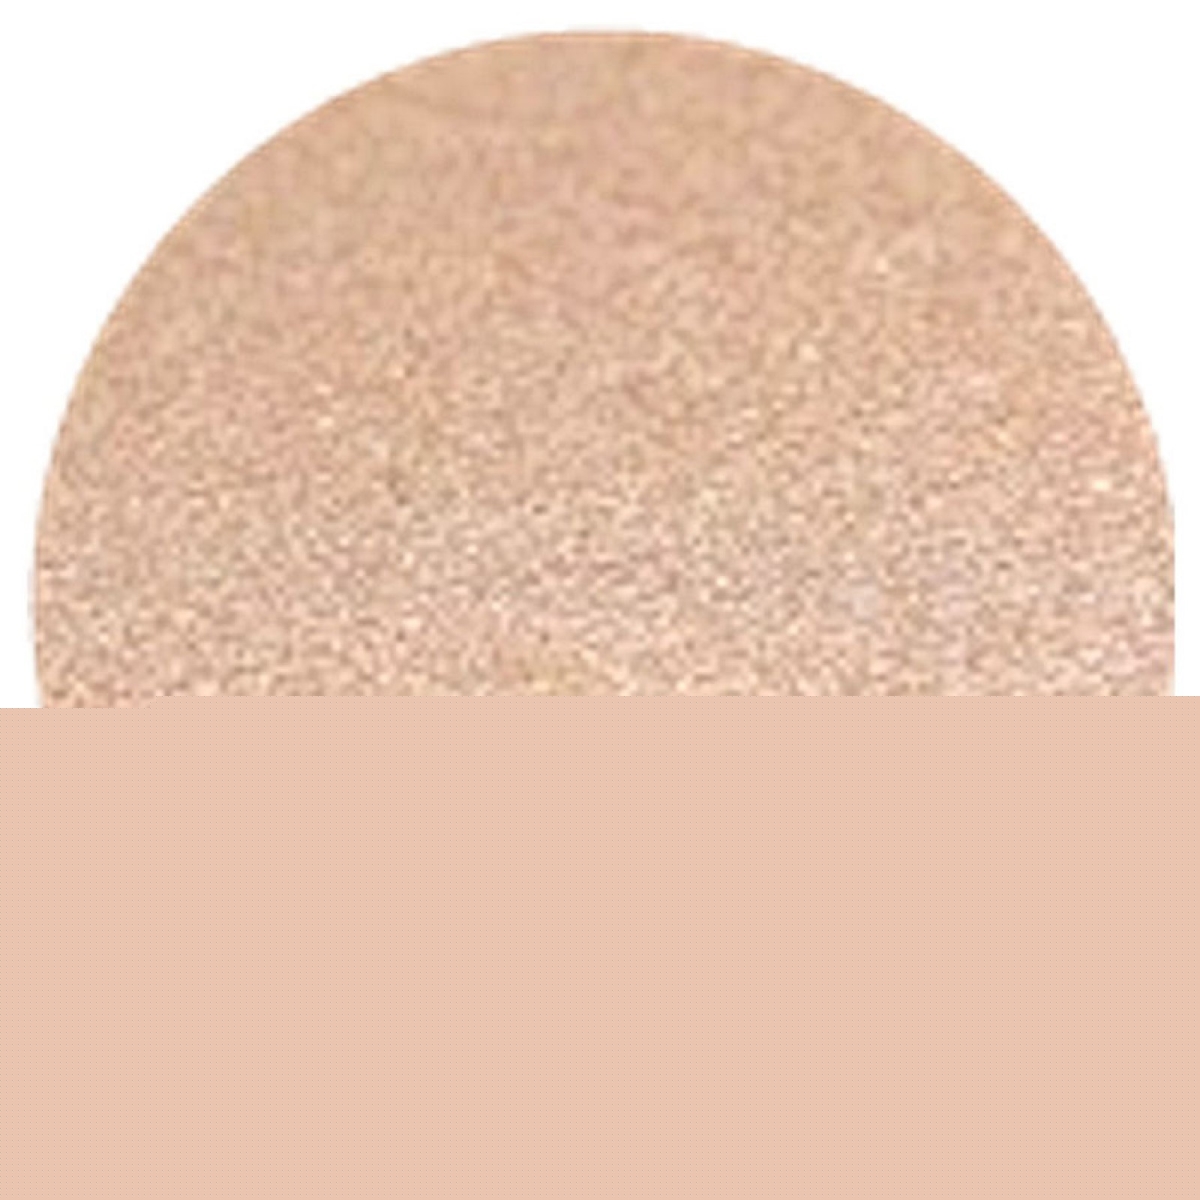 227606 045 Oz Honeybee Gardens Natural Cosmetics Ninja Kitty, Pale Pink With Light Shimmer Pressed Mineral Eye Shadows